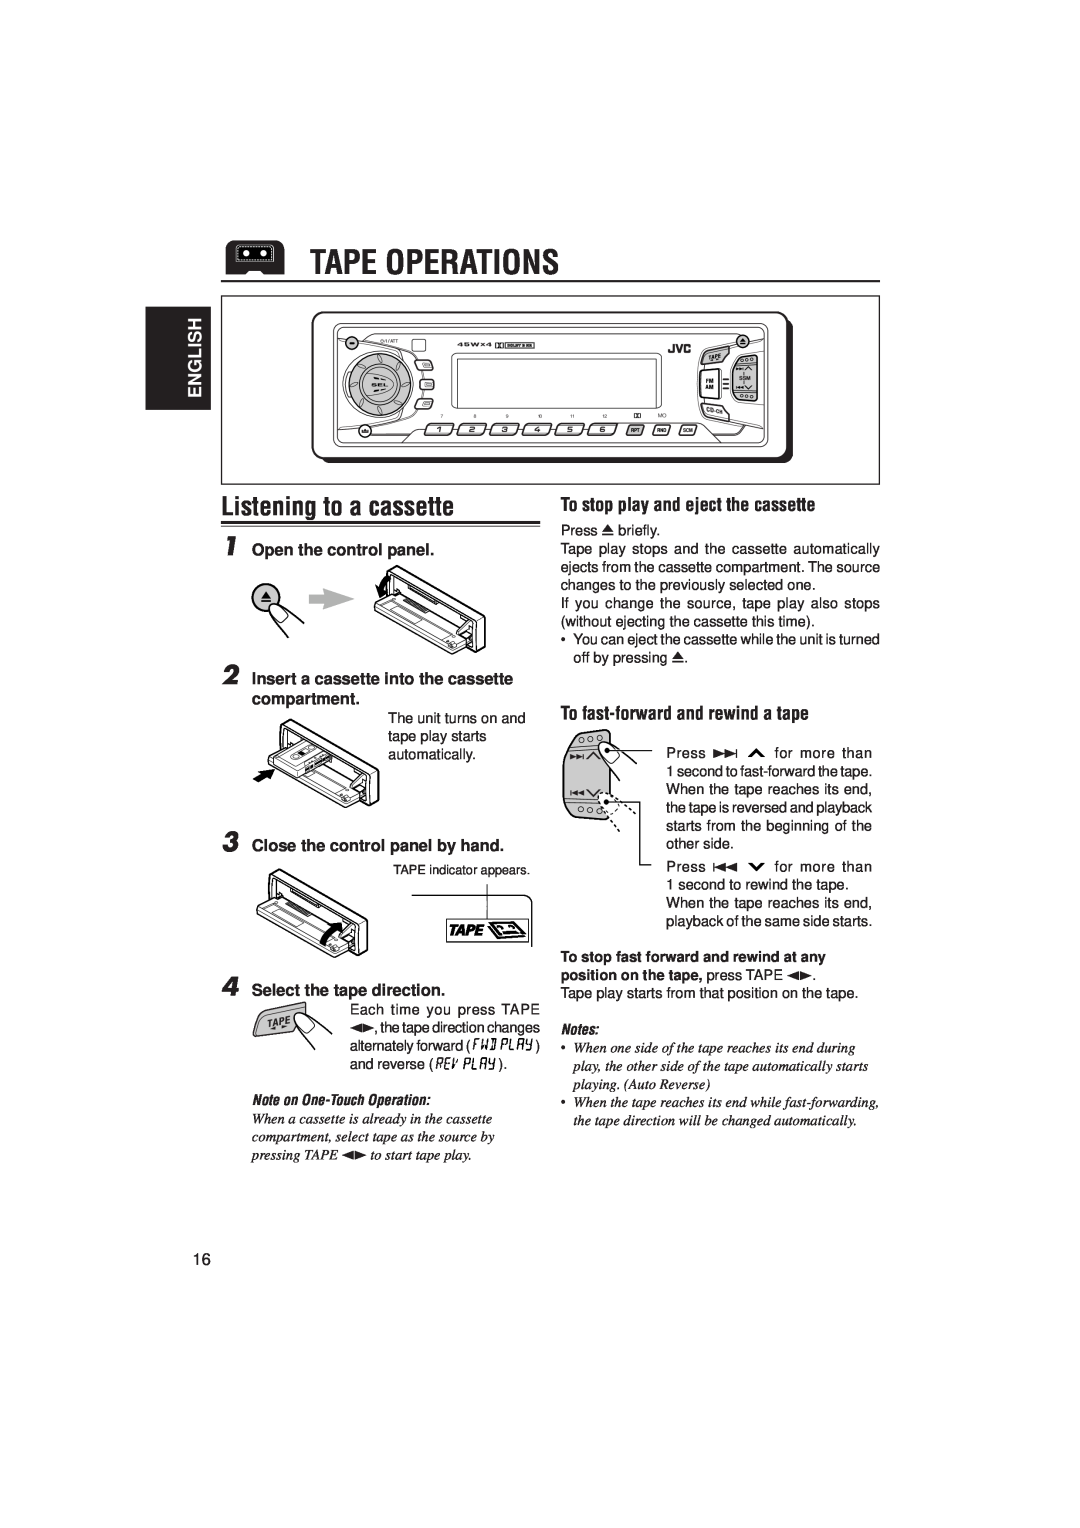 JVC KS-FX815 manual Tape Operations, Listening to a cassette, To stop play and eject the cassette, Open the control panel 